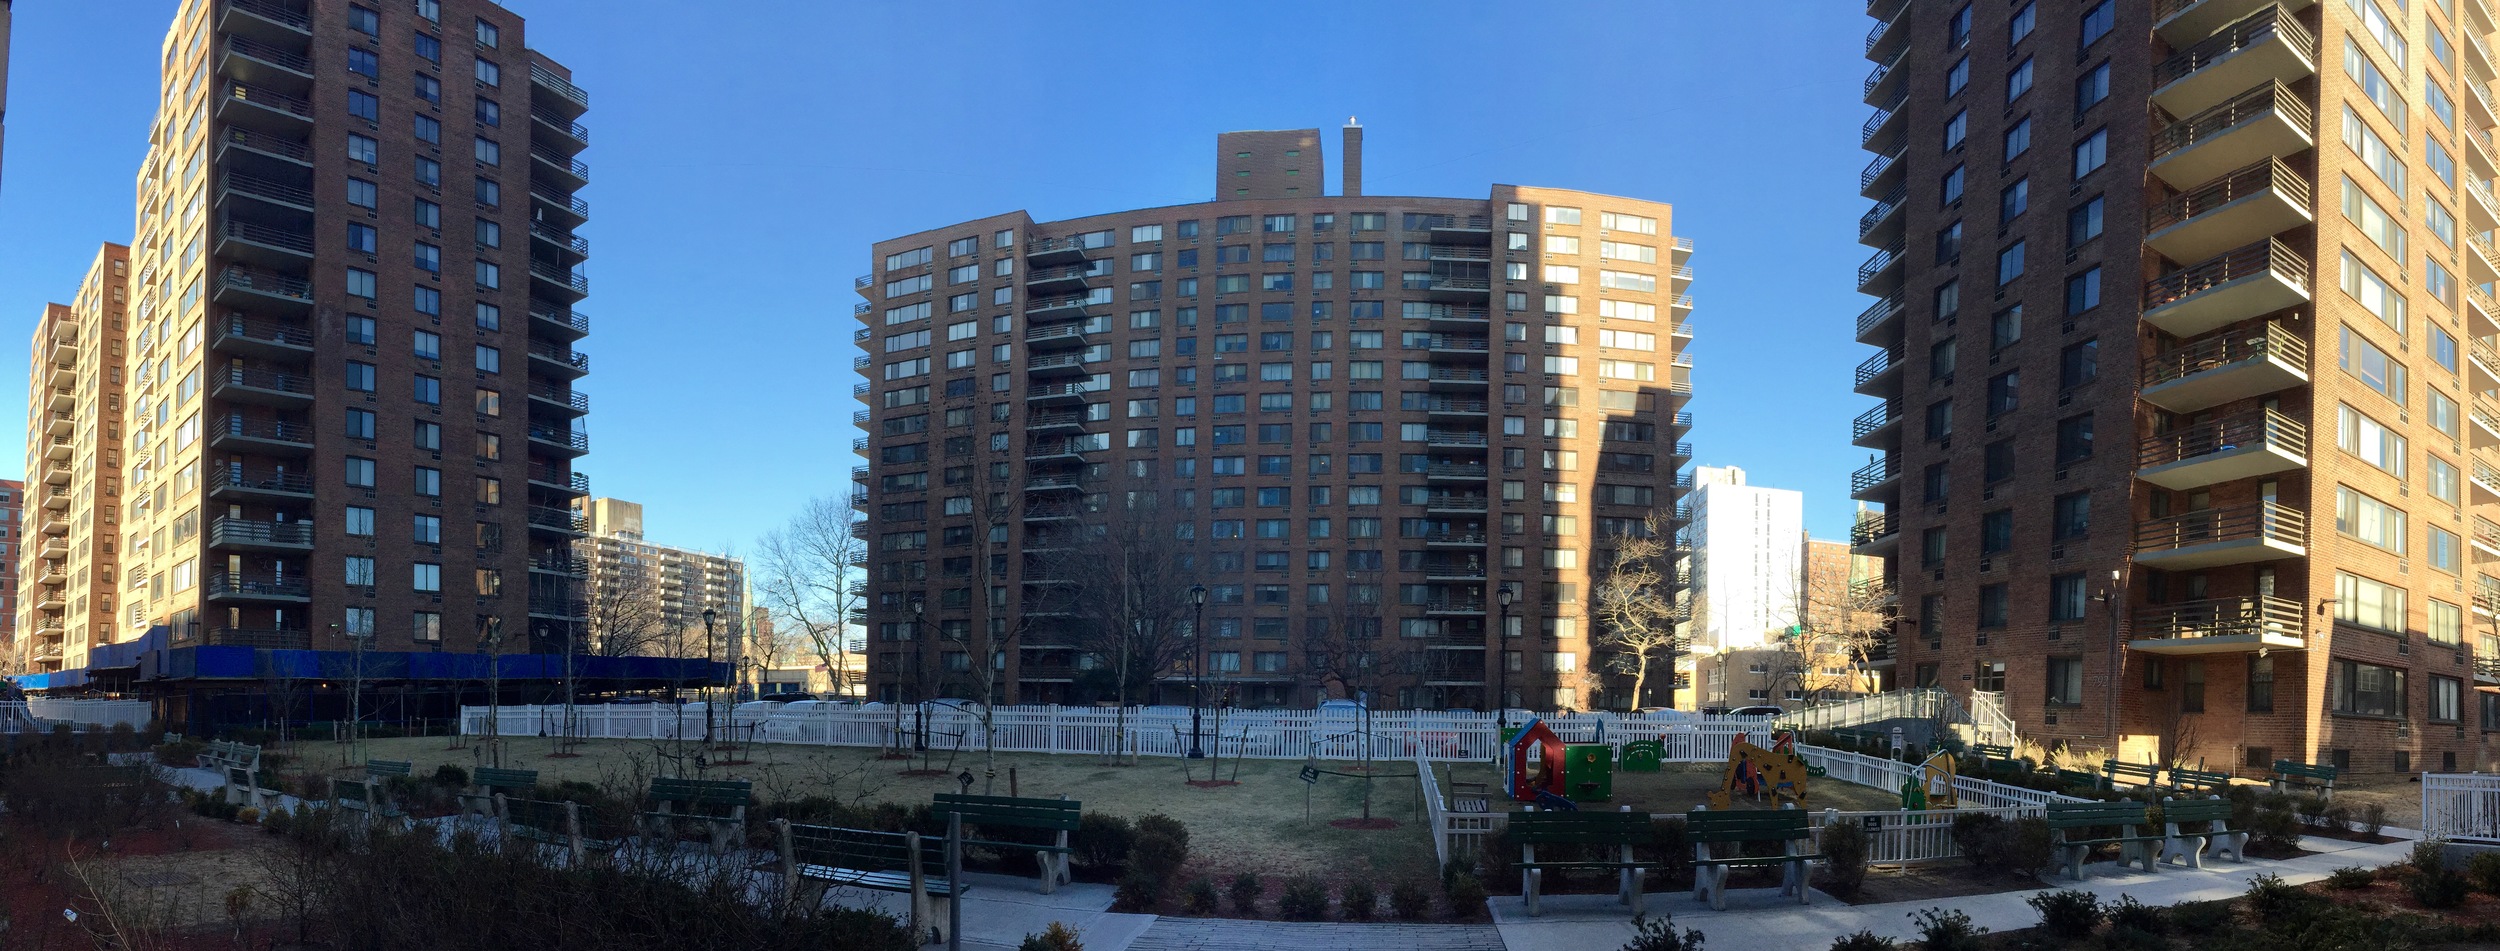 Apartment Complexes In NYC - Park West Village - Upper West Side